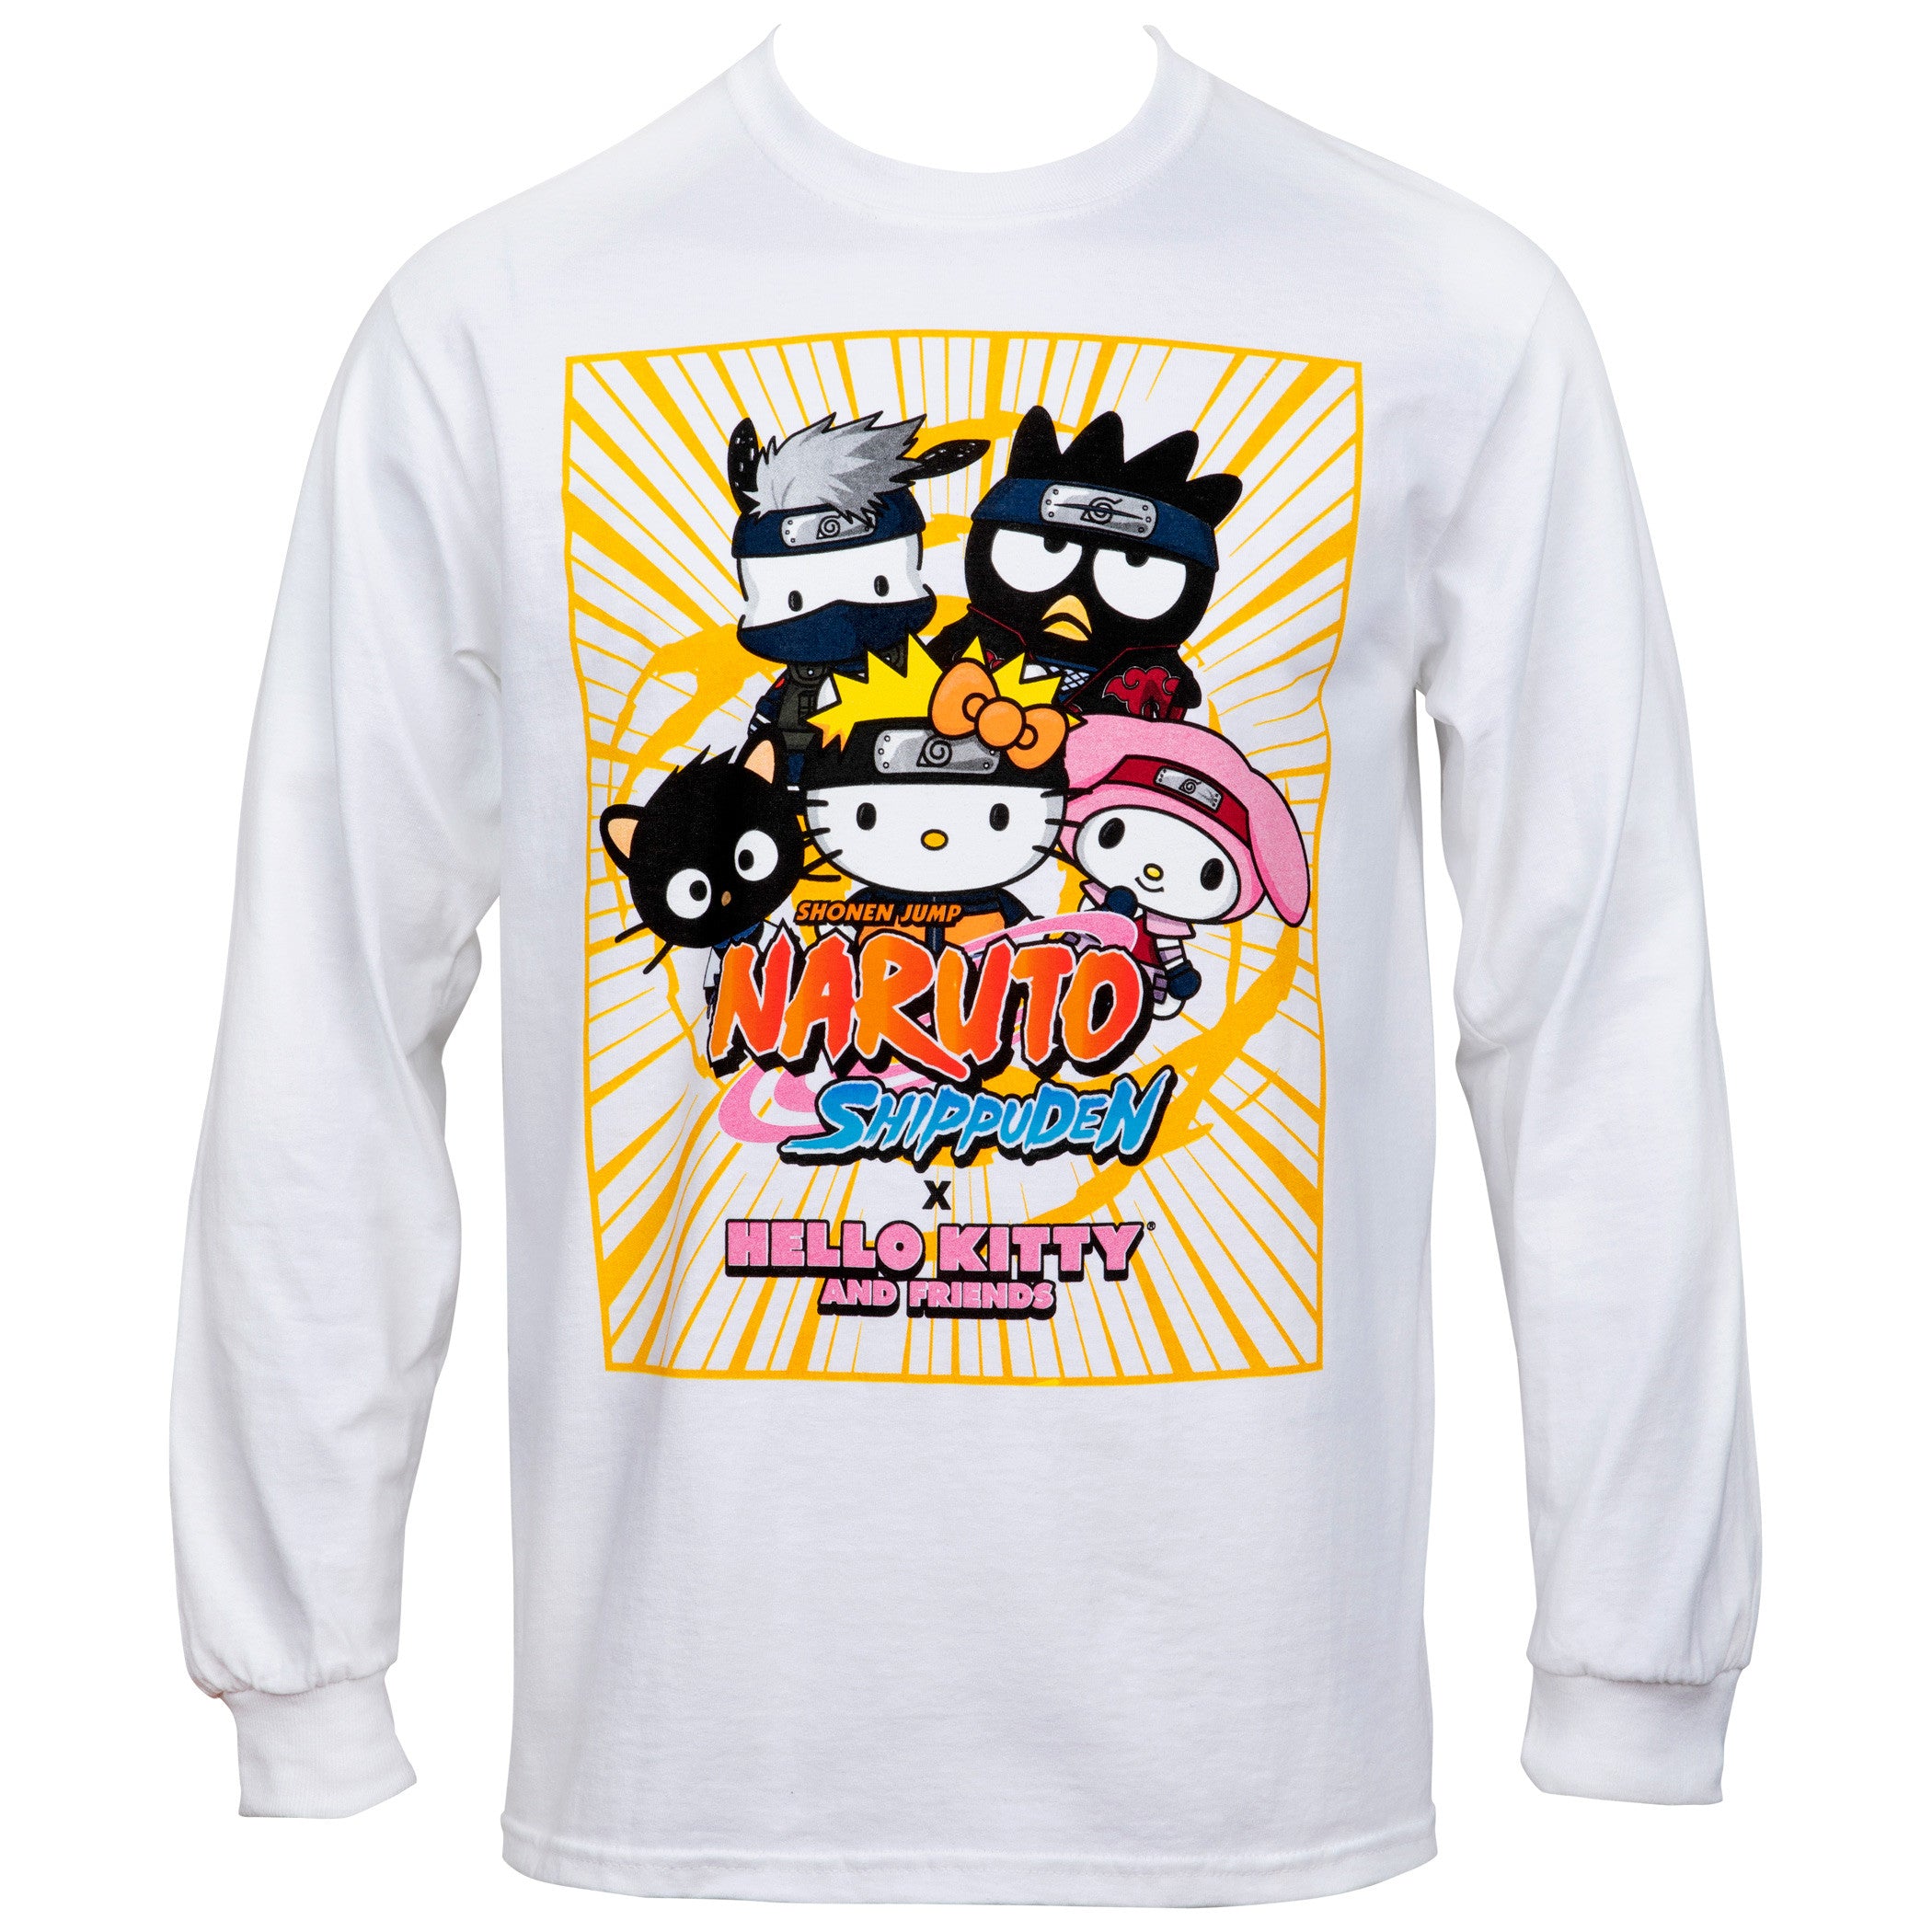 title:Hello Kitty X Naruto Shippuden Group Characters Long Sleeve T-Shirt;color:White